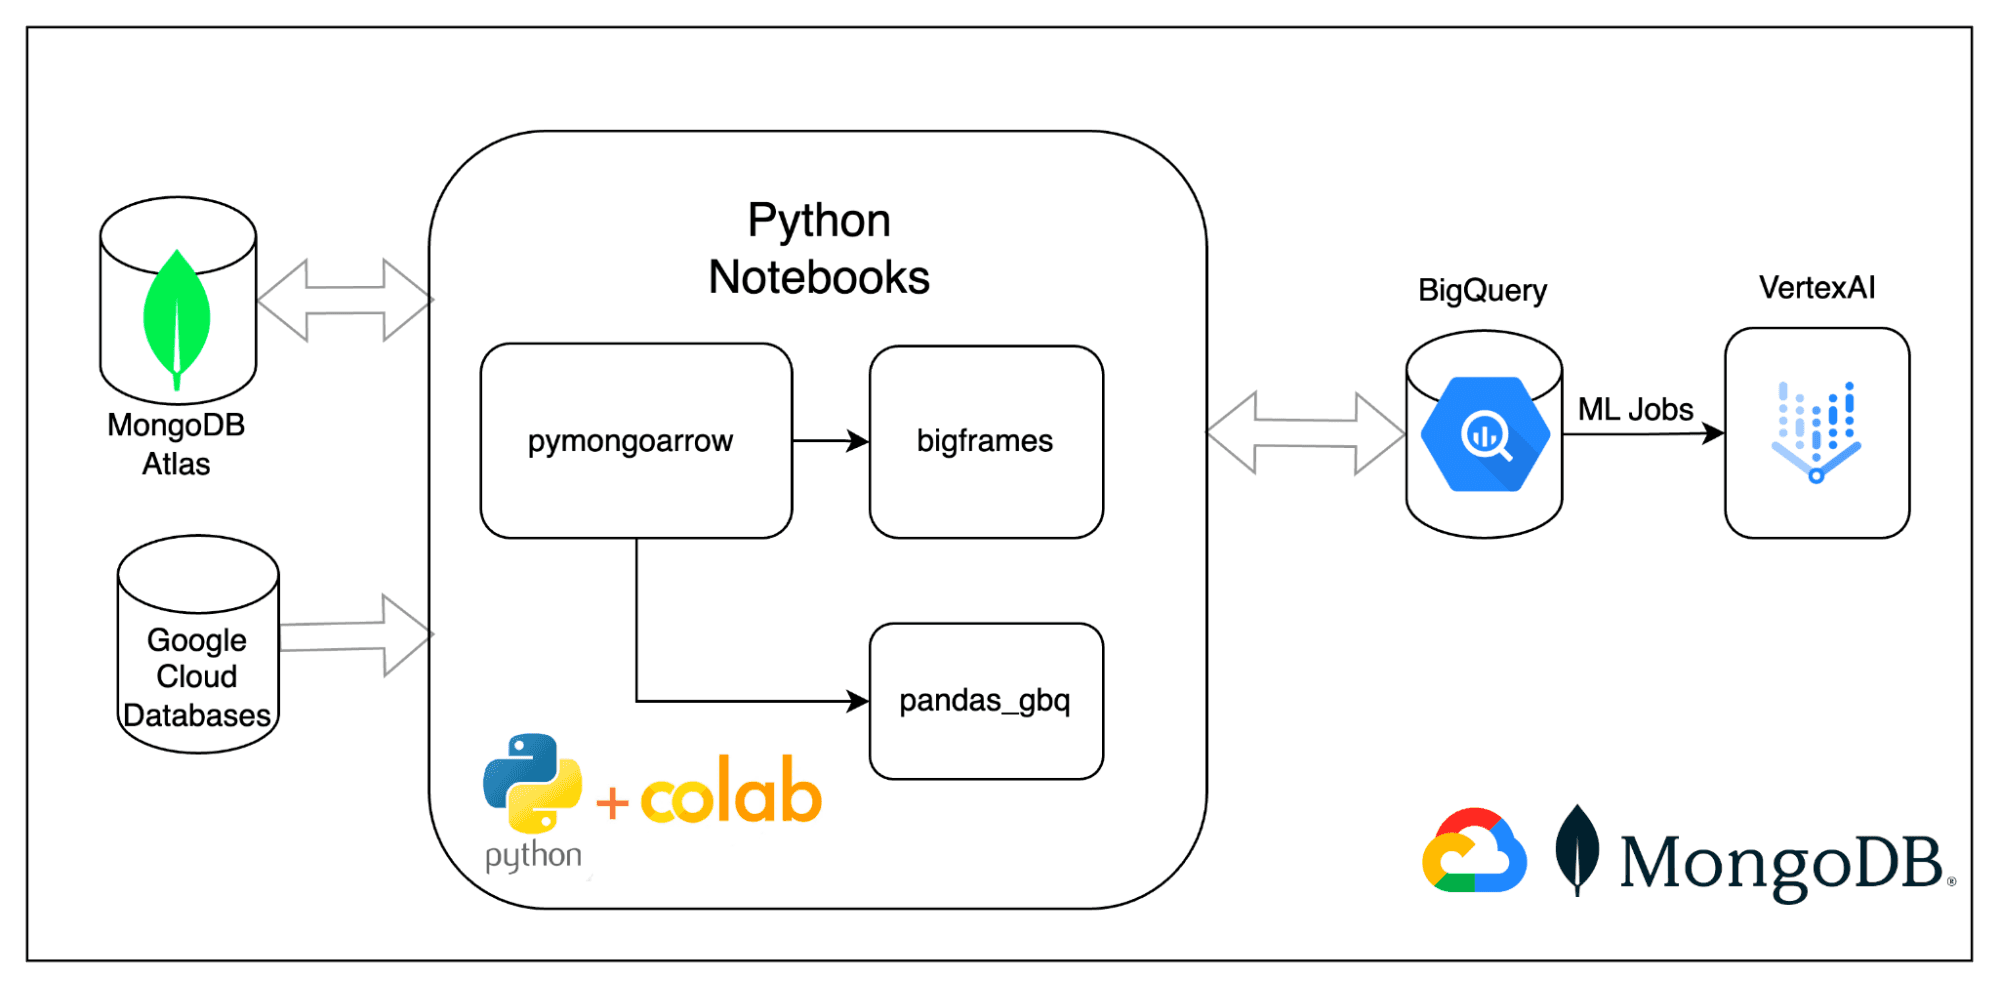 Image 1: Architecture diagram for MongoDB interaction with BigQuery and VertexAI using python libraries